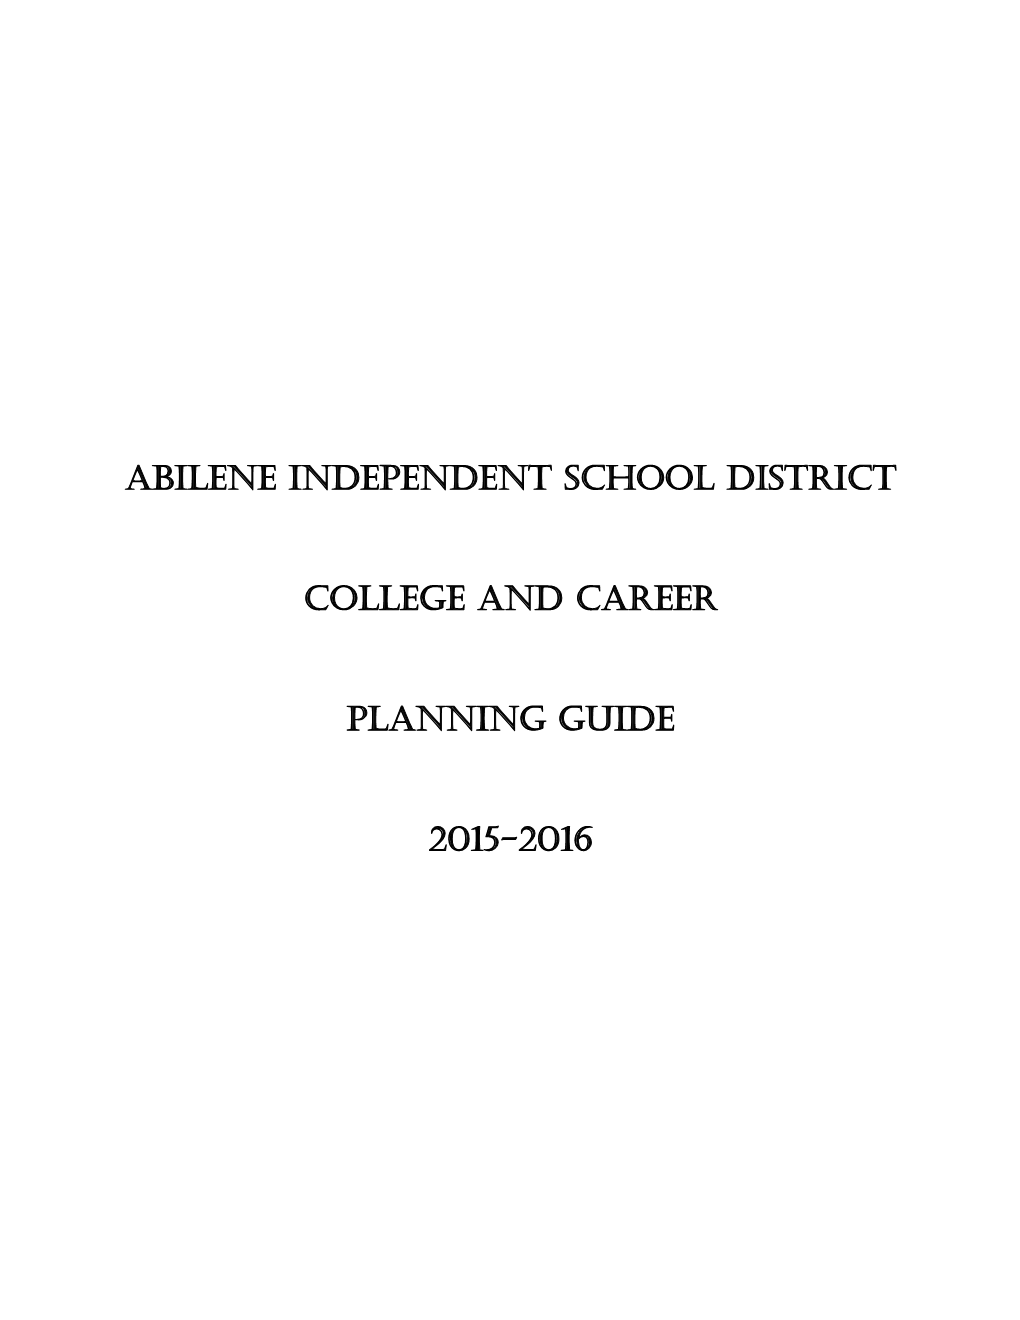 ABILENE INDEPENDENT SCHOOL DISTRICT College and Career